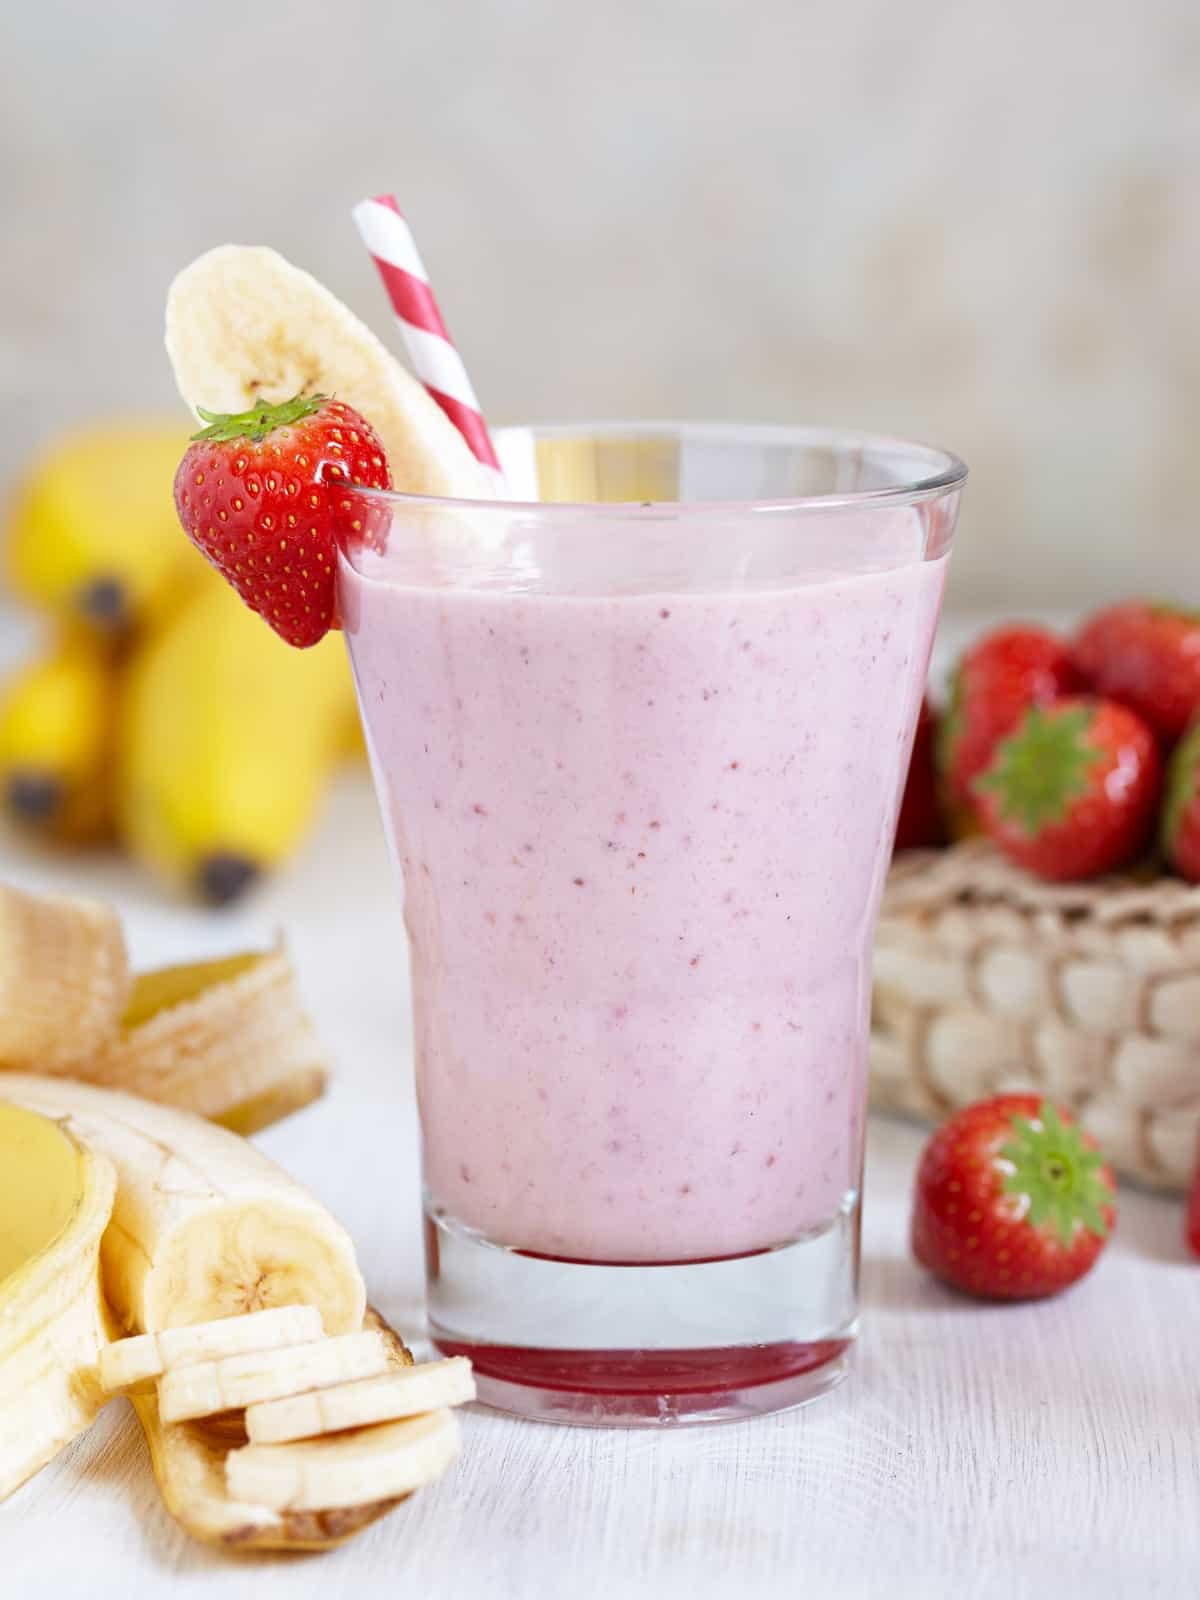 mango strawberry banana smoothie in a glass jar surrounded by fresh fruit